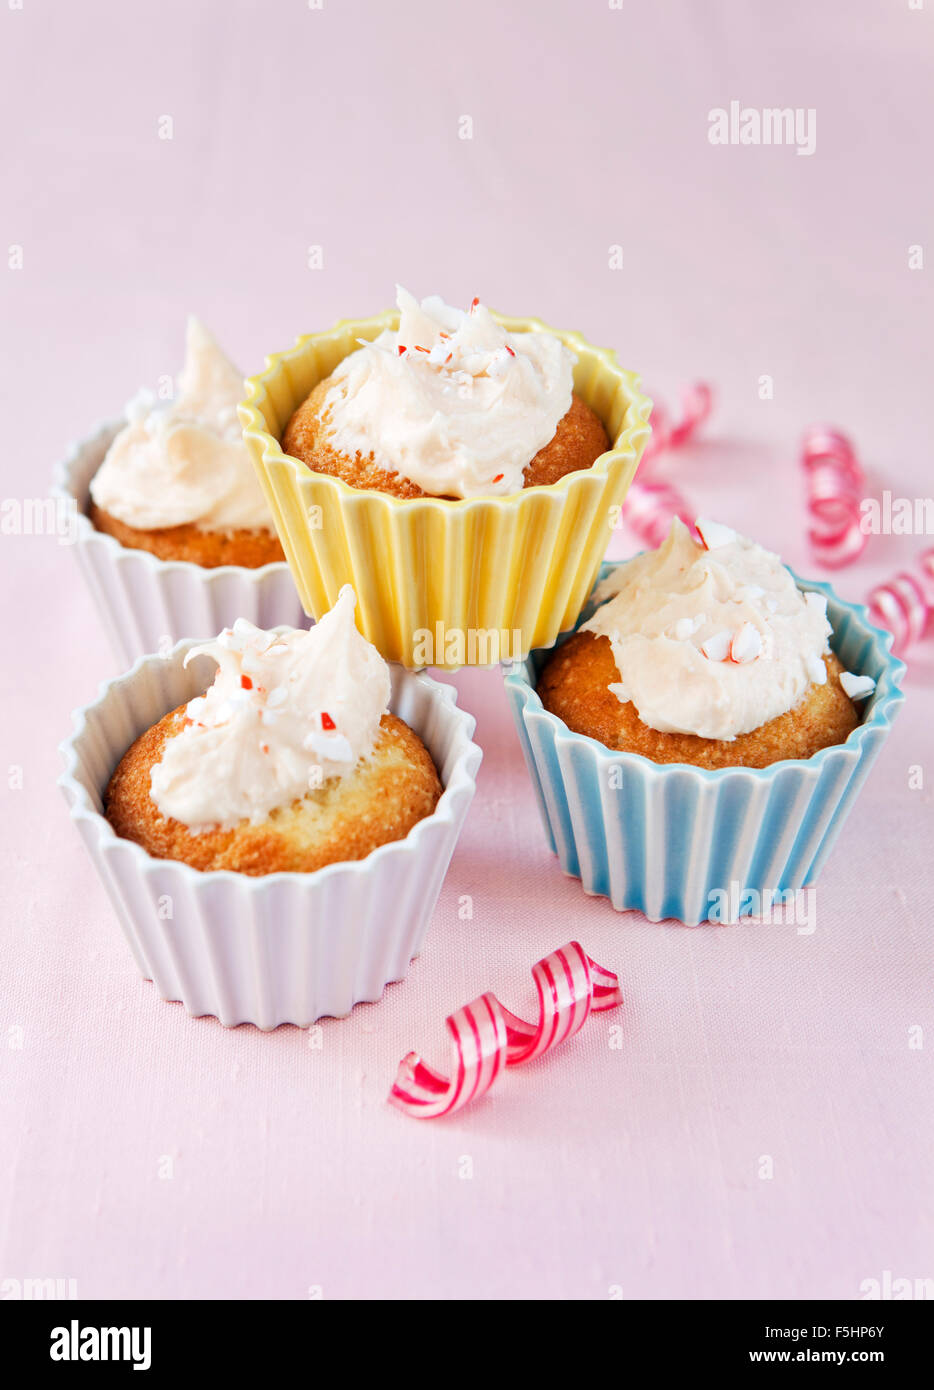 Studio shot of muffins with crushed Polkagris, famous red and white swedish boiled sweets Stock Photo